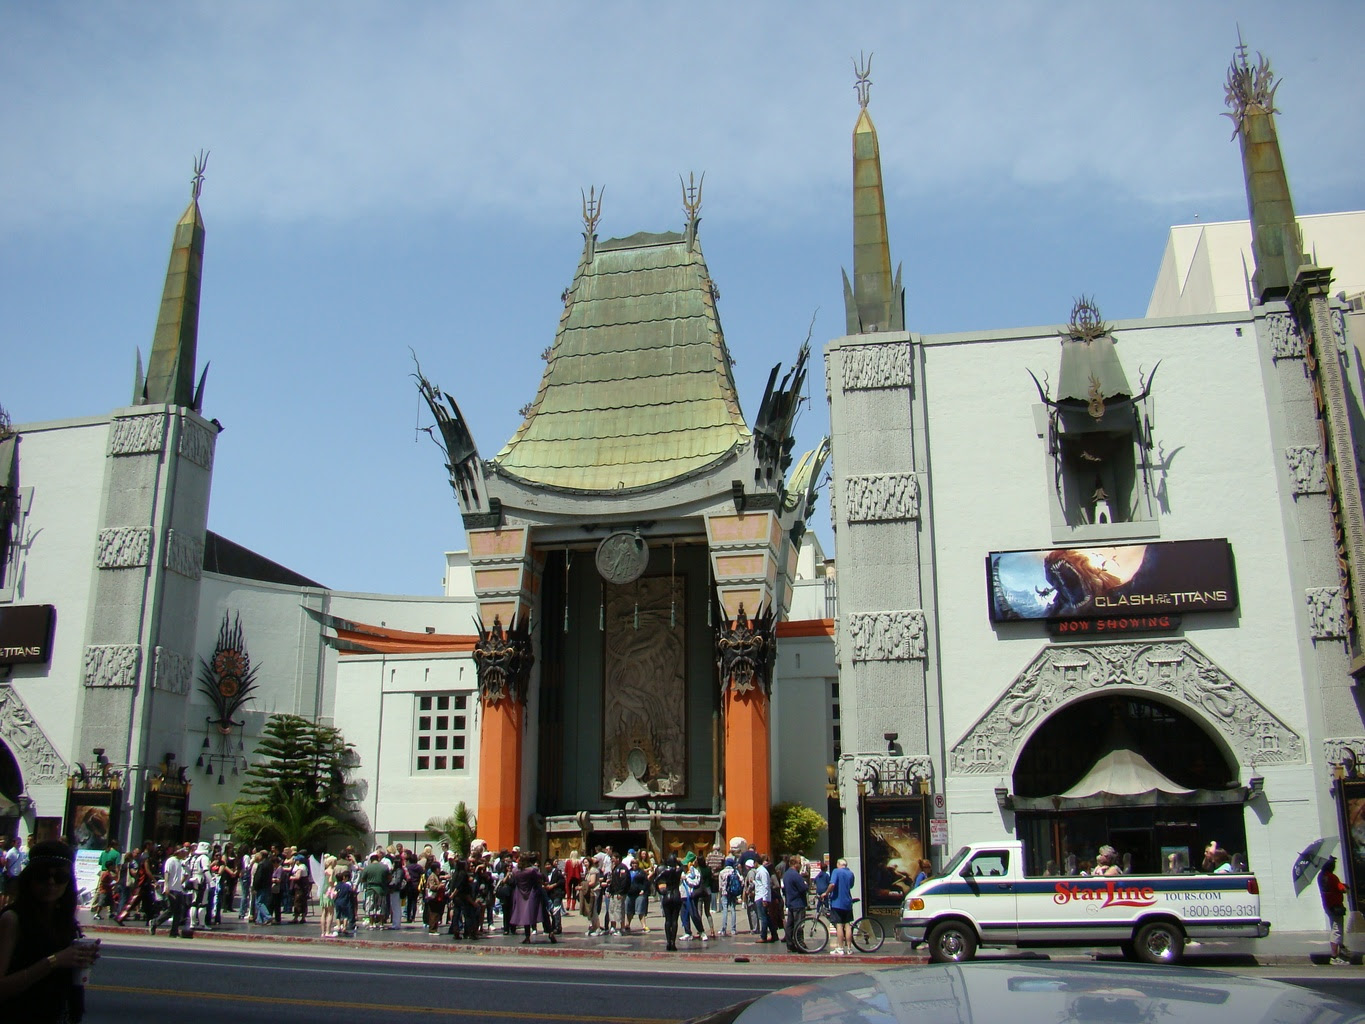 Between the 2,500+ stars and the architecture on hollywood blvd, there is a plethora of interesting sights. Grauman's Chinese Theatre & Hollywood Walk of Fame